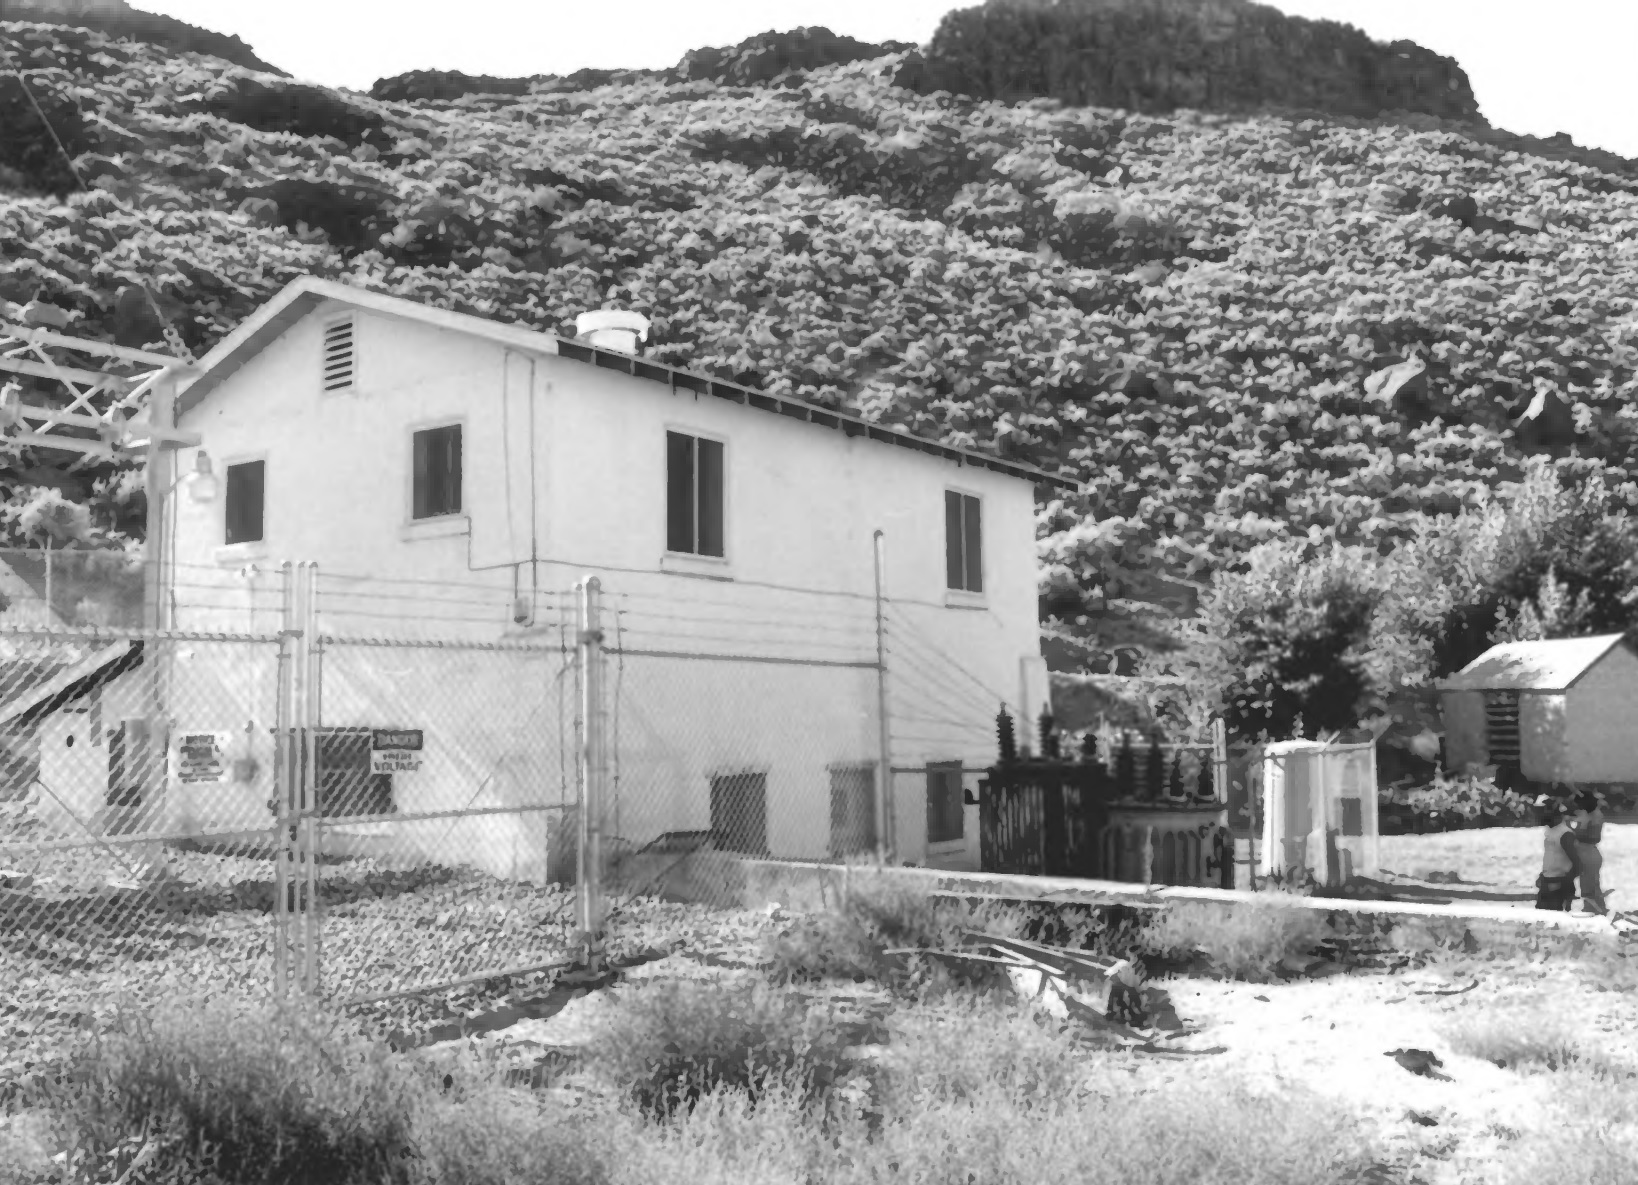 The Gunlock Hydroelectric Powerhouse and an adobe shed